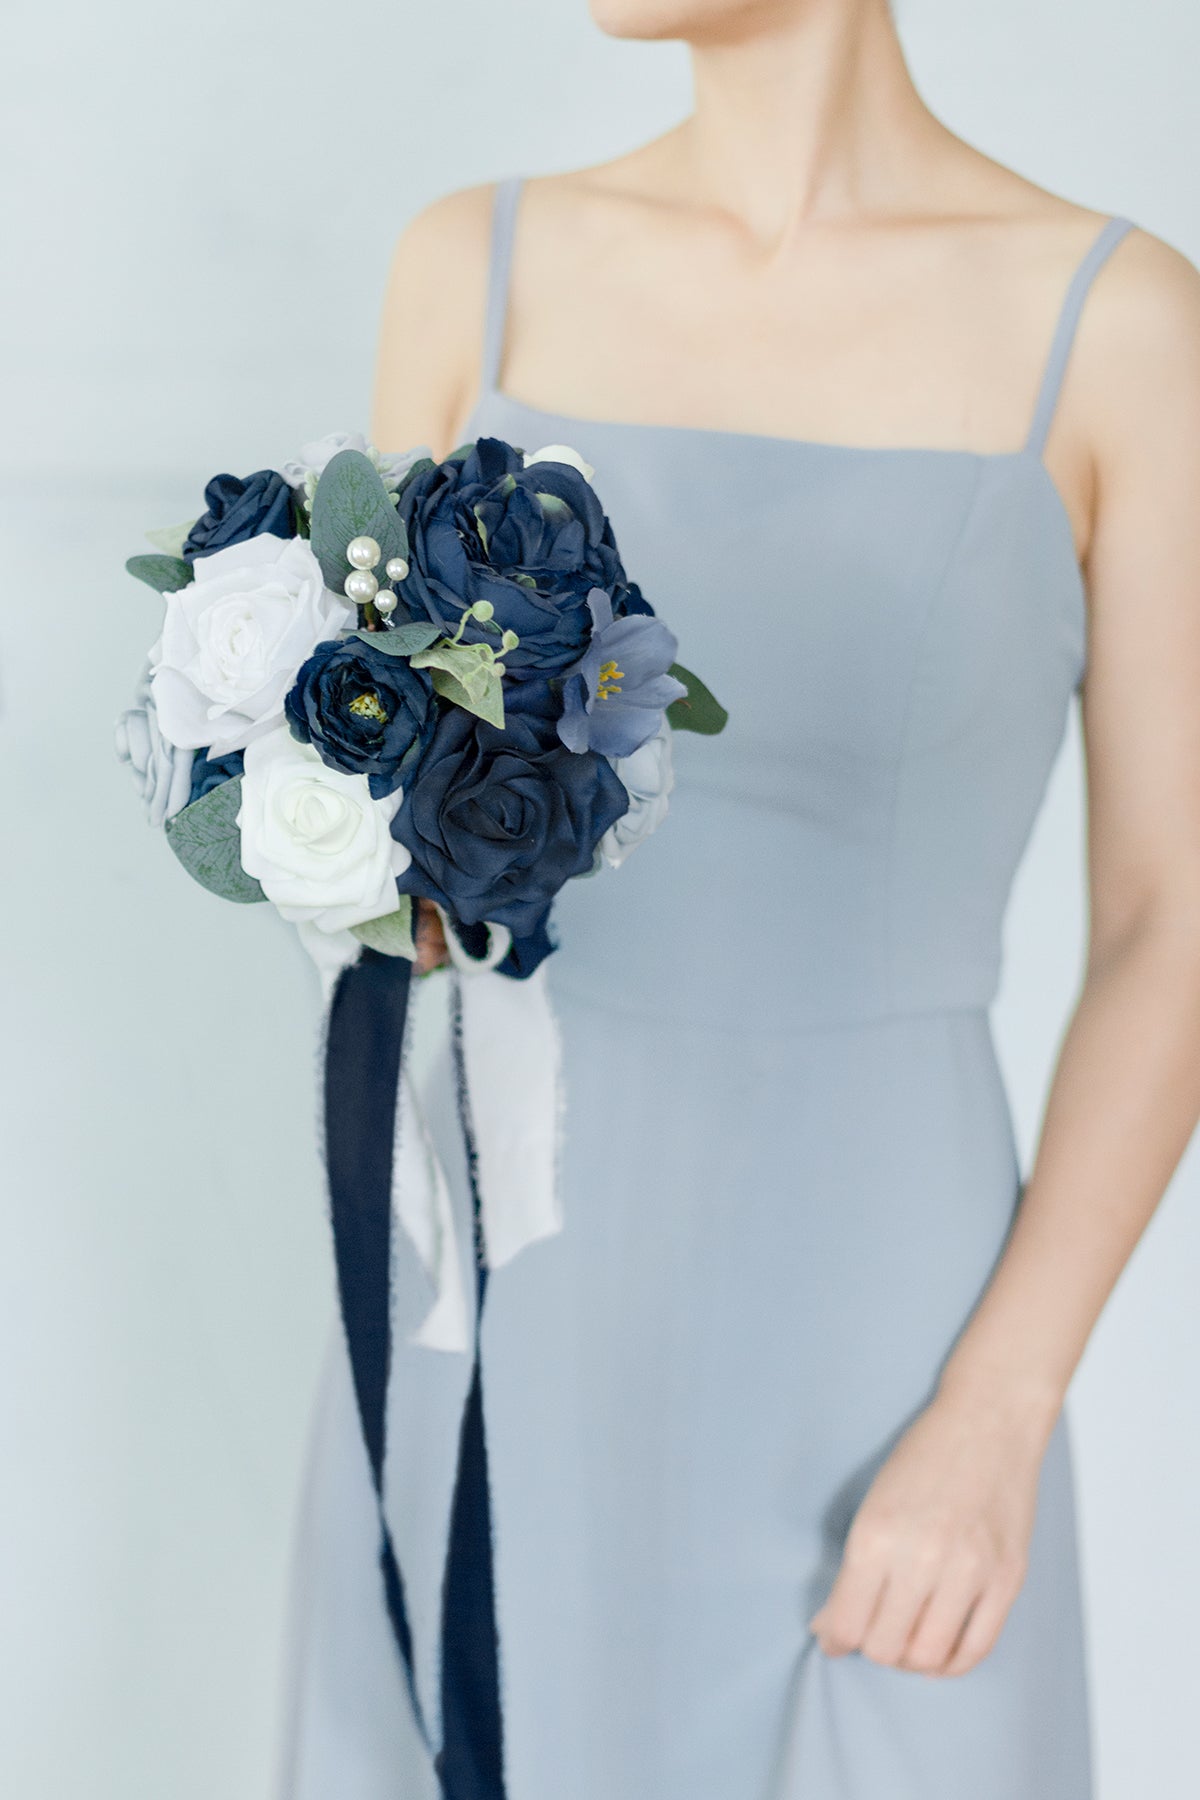 Additional Flower Decorations in Dusty Blue & Navy